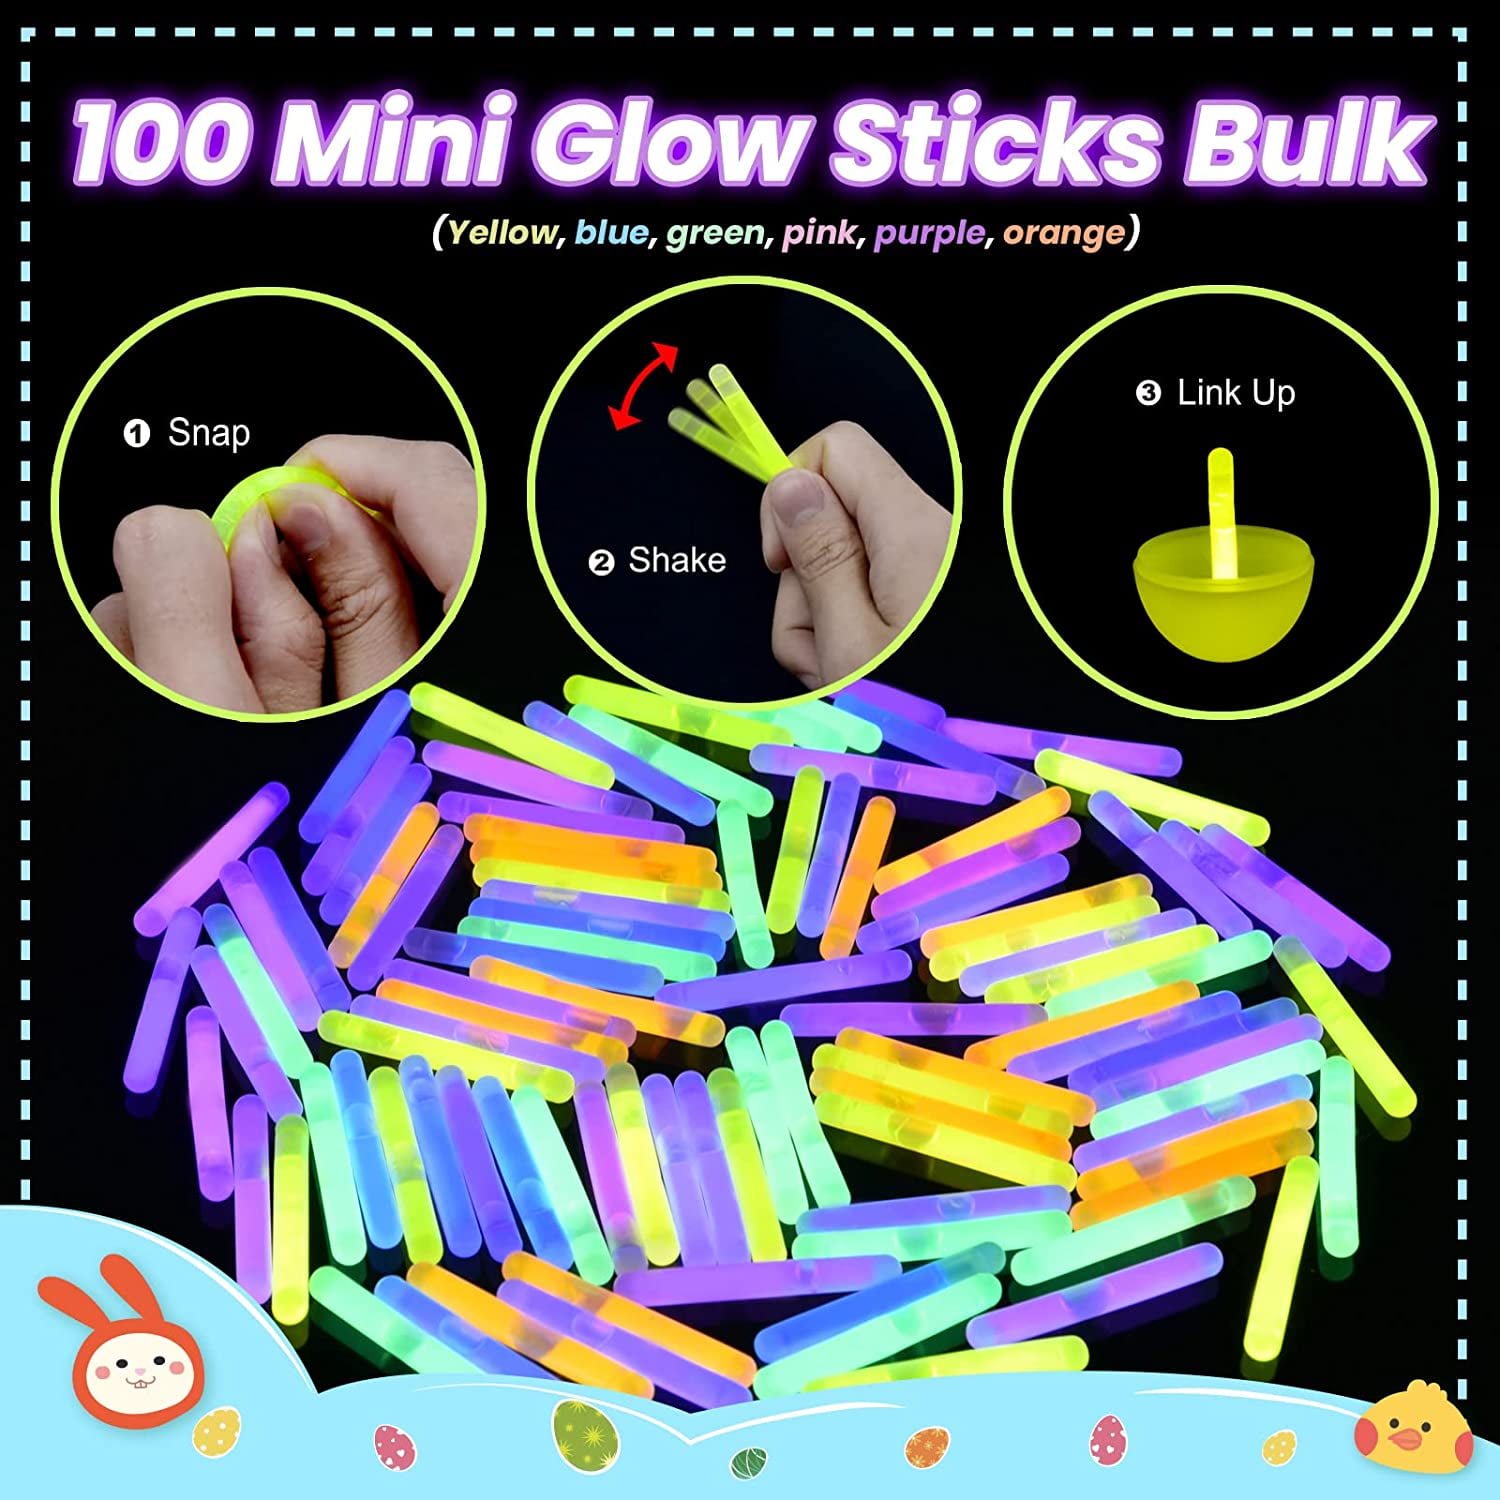 PartySticks Glow Easter Eggs 48pk Bulk Party Favors for Kids - Glow in The Dark